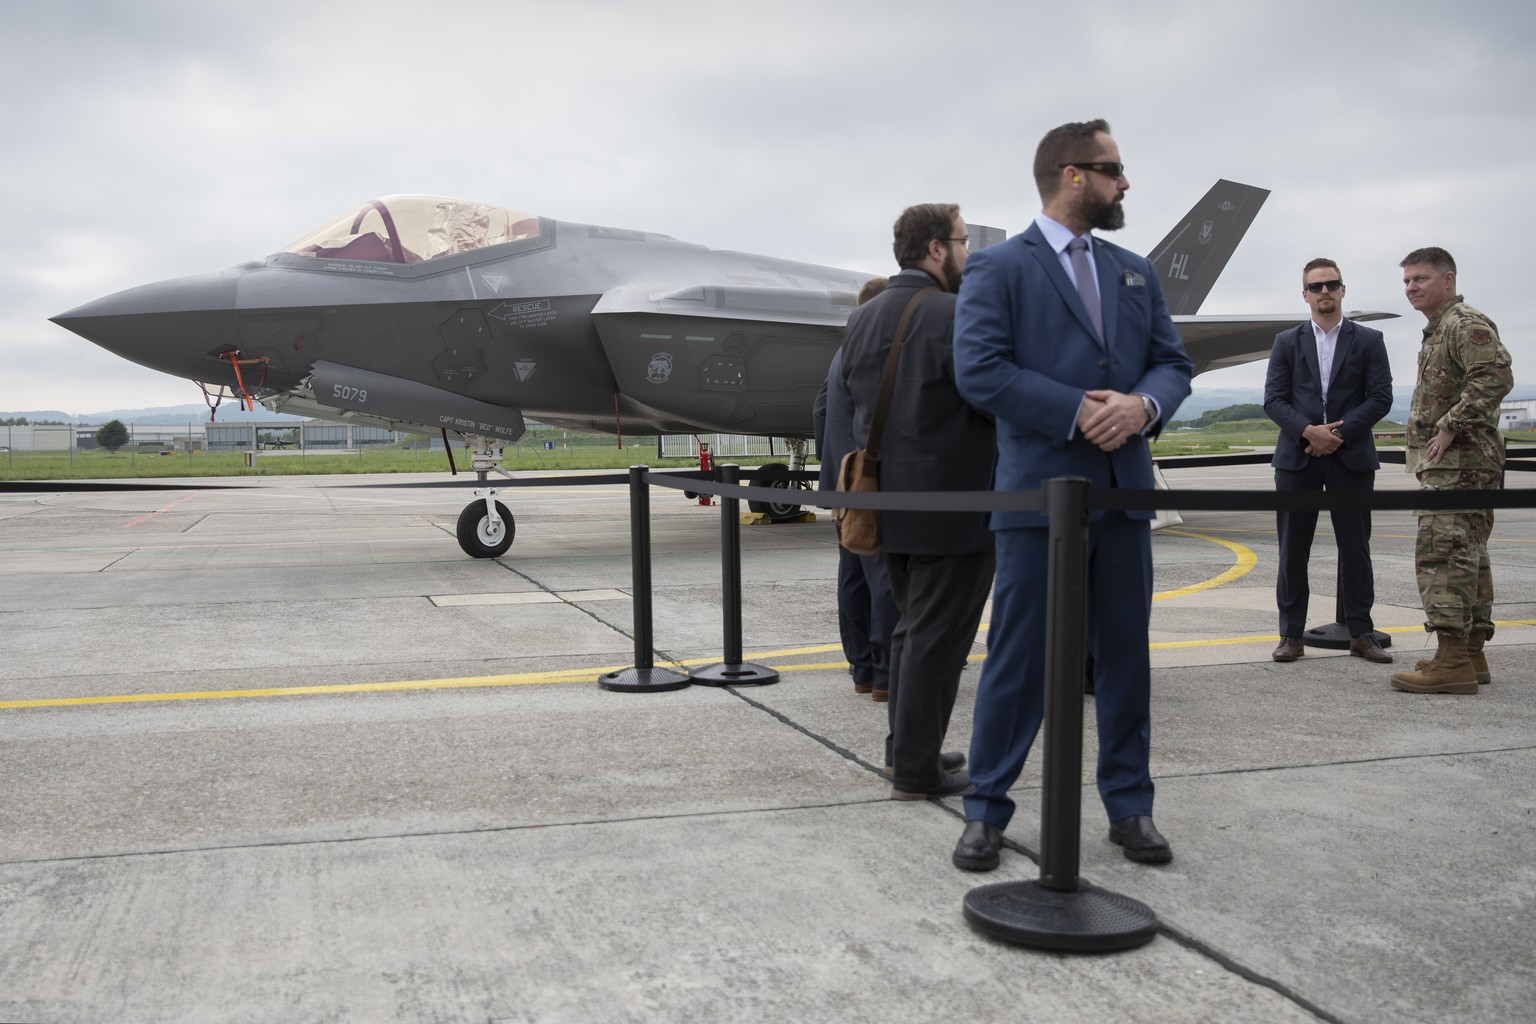 A Lockheed Martin F-35A fighter jet is pictured during a test and evaluation day at the Swiss Army airbase, in Payerne, Switzerland, Friday, June 7, 2019. (KEYSTONE/Peter Klaunzer)